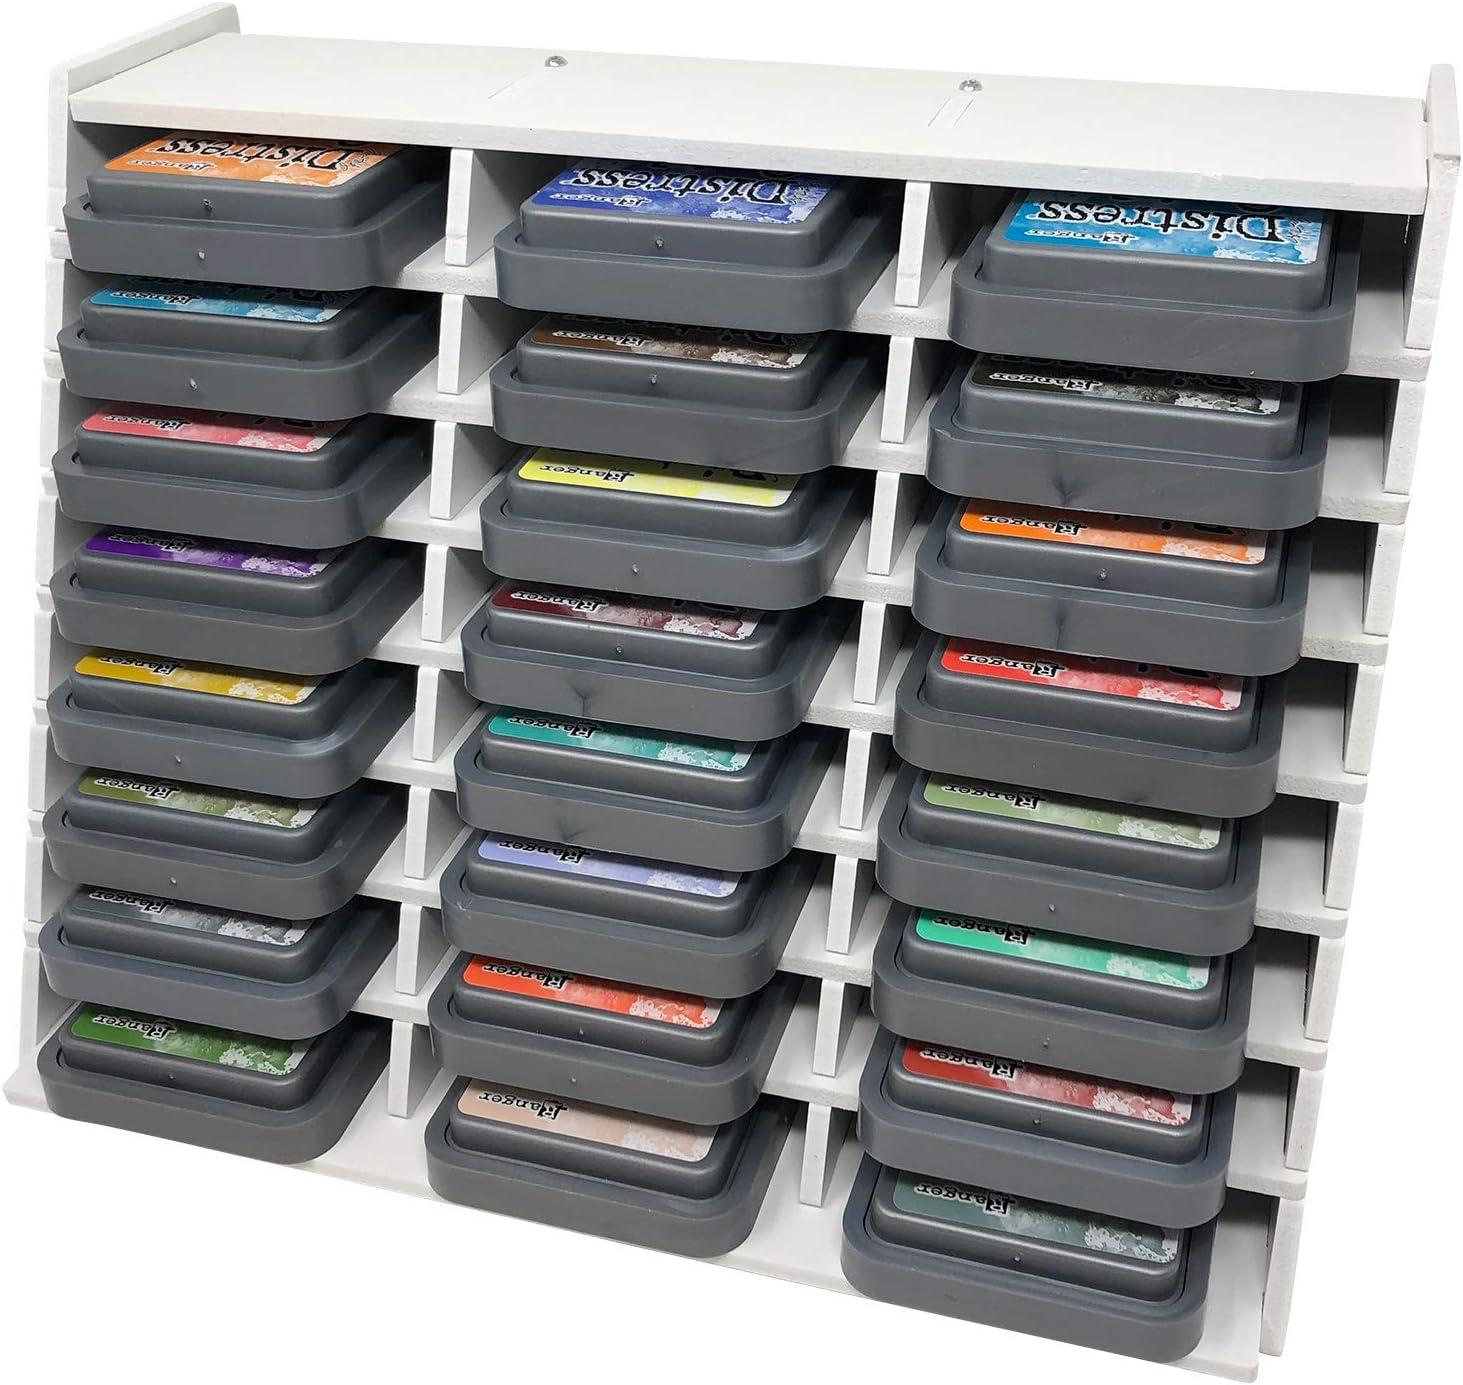 Pixiss Ink Pad Storage Holder and Stamp Pad Storage for Distress